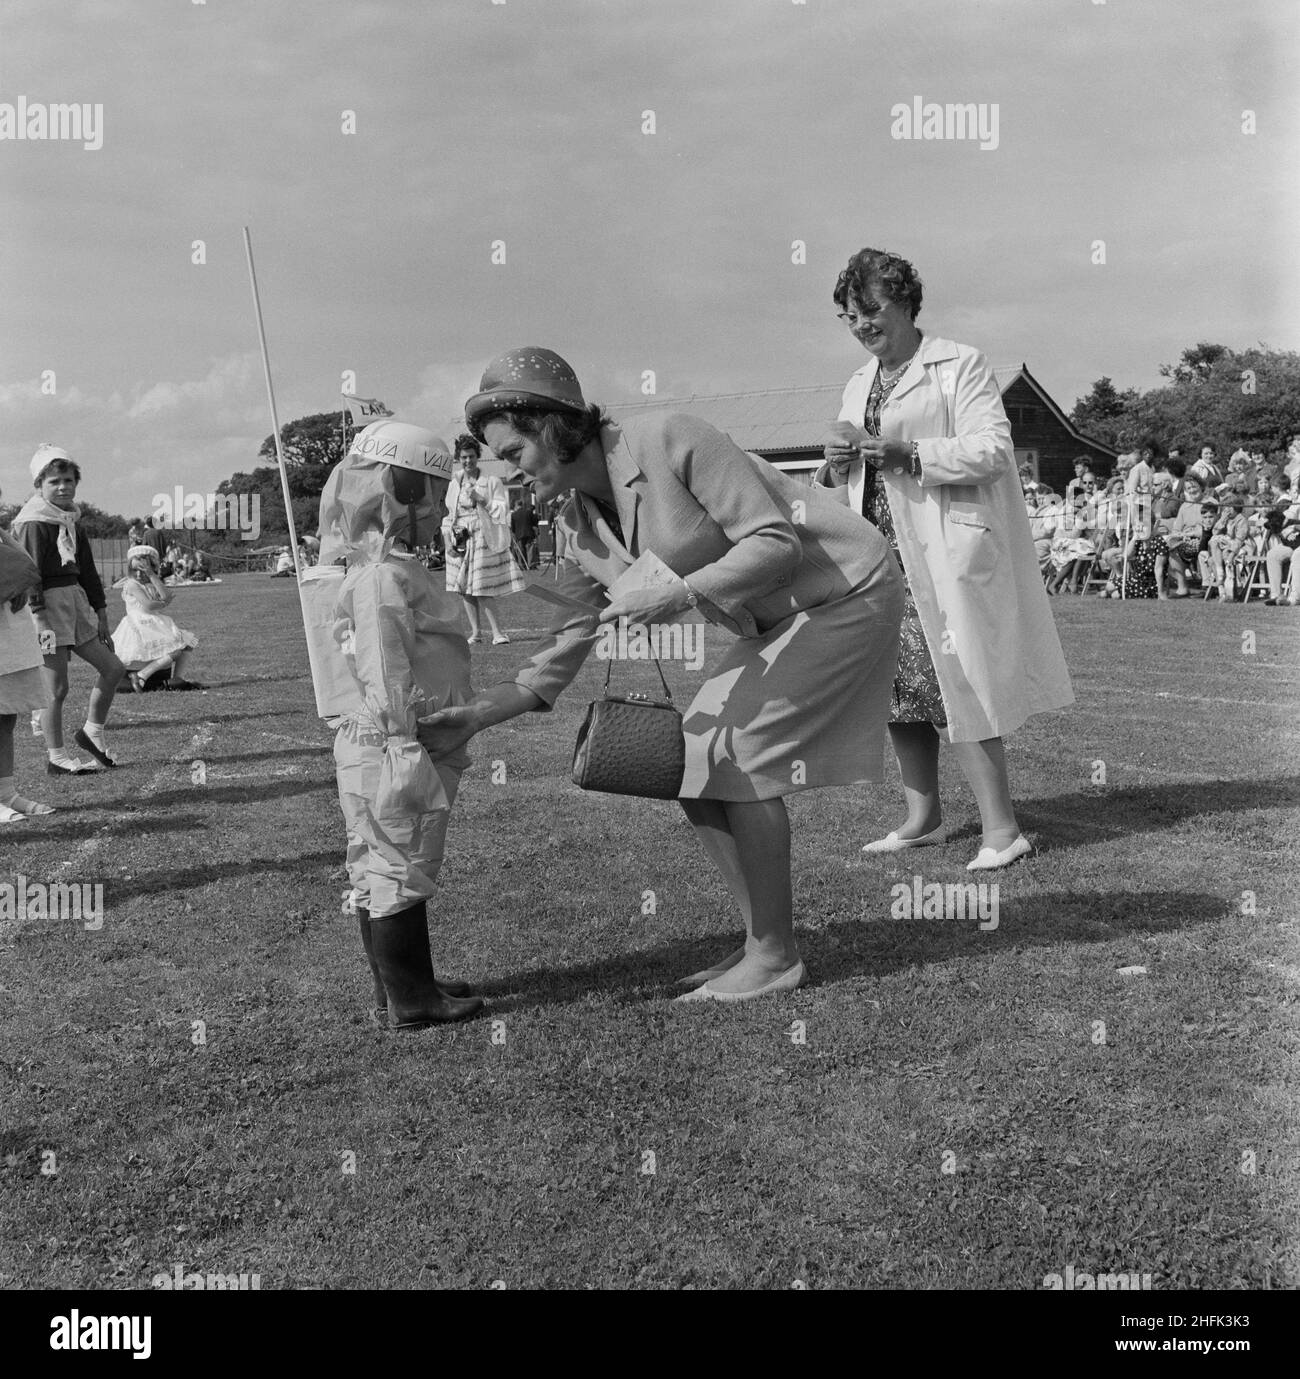 Laing Sports Ground, Rowley Lane, Elstree, Barnet, London, 22/06/1963. A young girl, dressed as the cosmonaut Valentina Tereshkova, receiving a prize from Hilda Laing after a fancy dress competition at the annual Laing sports day at Elstree. In 1964 Laing's annual Sports Day was held at sports ground on Rowley Lane at Elstree on 22nd June. Events included inter-branch tennis, a football competition, an athletic programme, and bowls. There were sport and athletic events for children, as well as fancy dress competitions. A week before this photograph was taken, Valentina Tereshkova became the fi Stock Photo